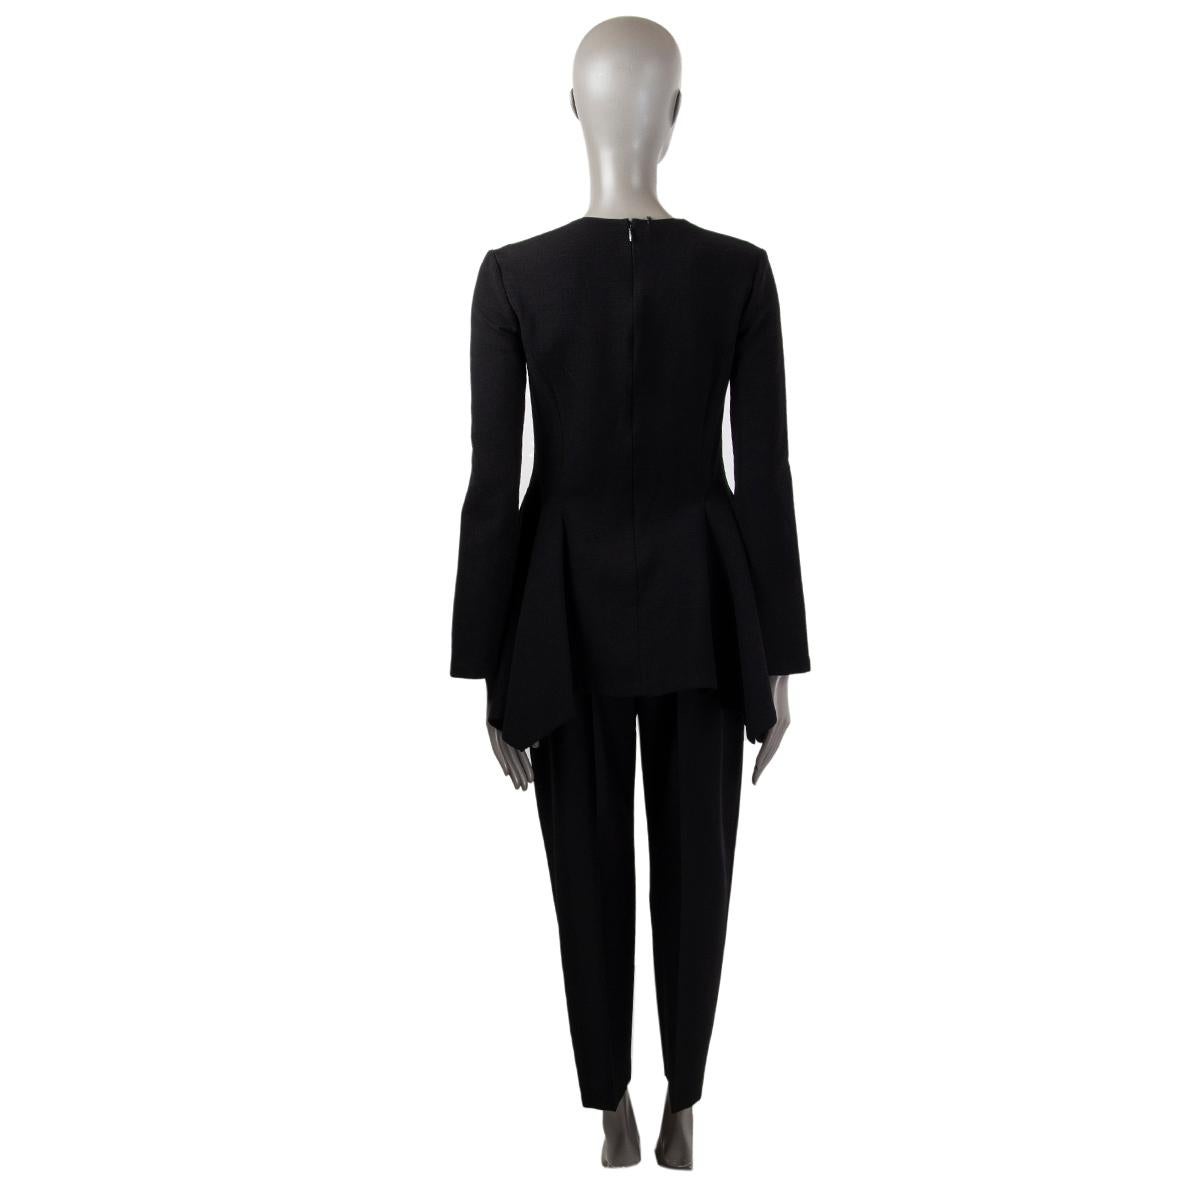 STELLA MCCARTNEY black wool FLARED Blouse Shirt 40 S In Excellent Condition For Sale In Zürich, CH